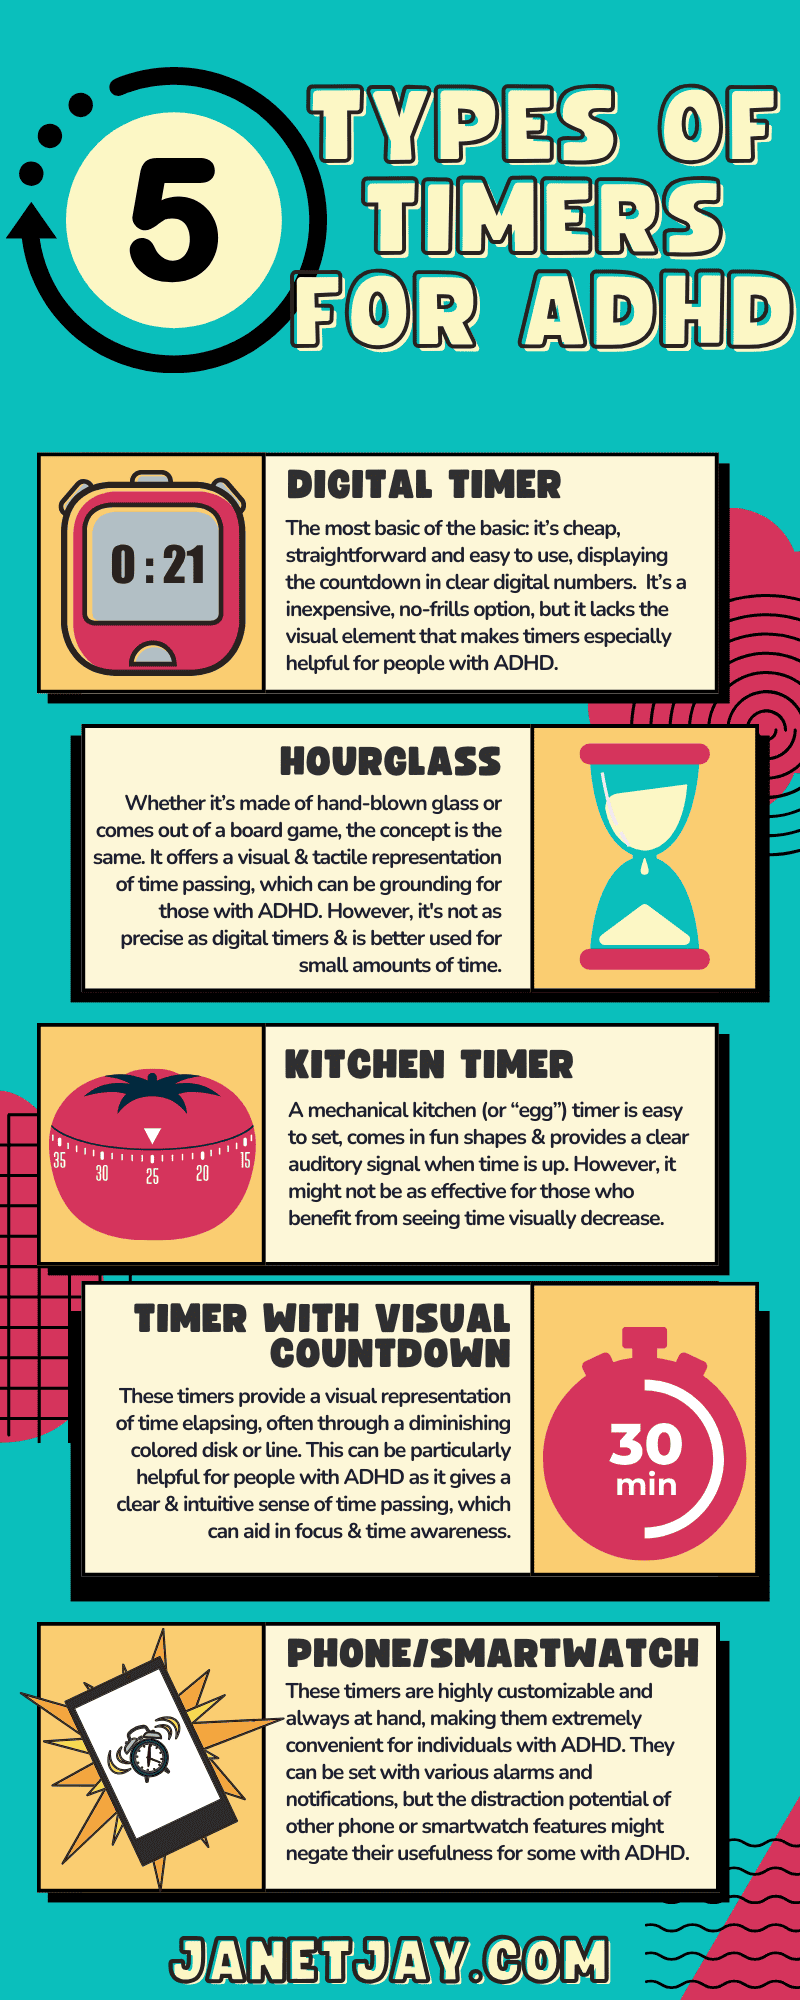 The image is an infographic titled "5 Types of Timers for ADHD". It is colorful and divided into sections for each type of timer: digital timer, hourglass, kitchen timer, timer with visual countdown, phone / smartwatch, with "janetjay.com" at the bottom